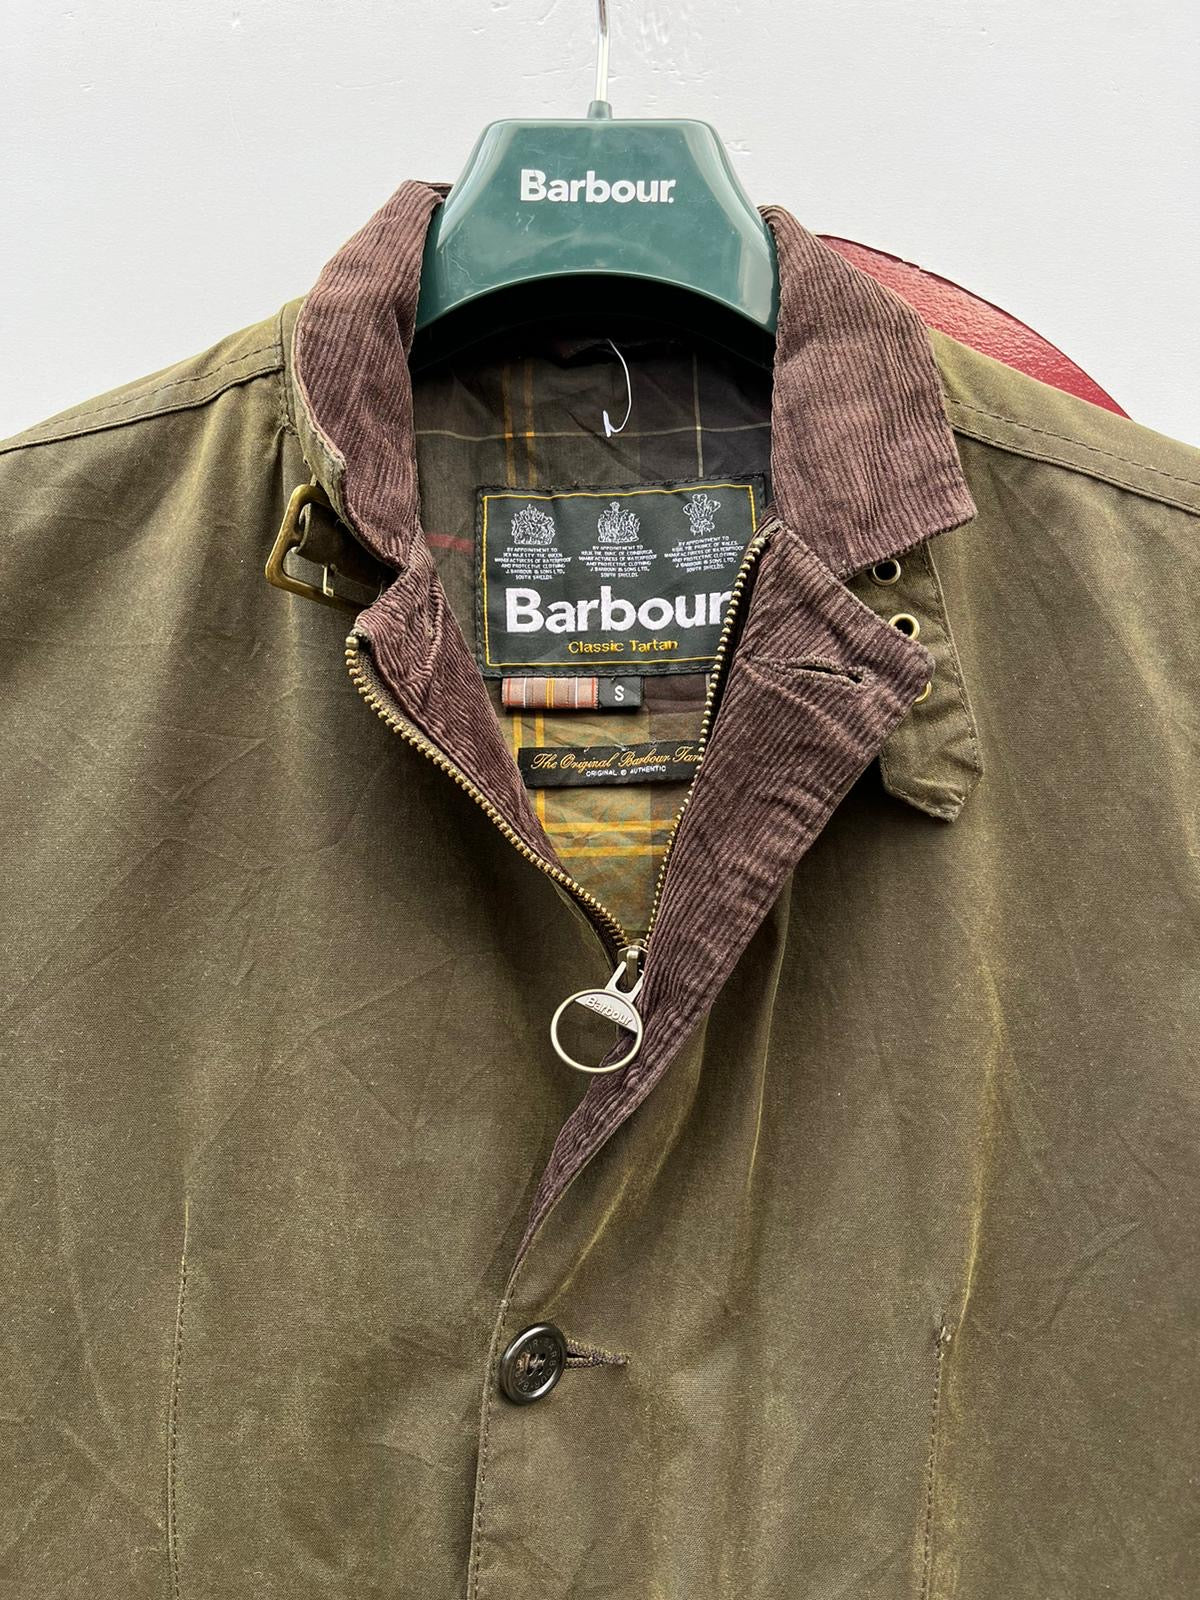 Giacca Barbour Uomo verde cerato Lutz Small- Green waxed cotton Jacket Size Small